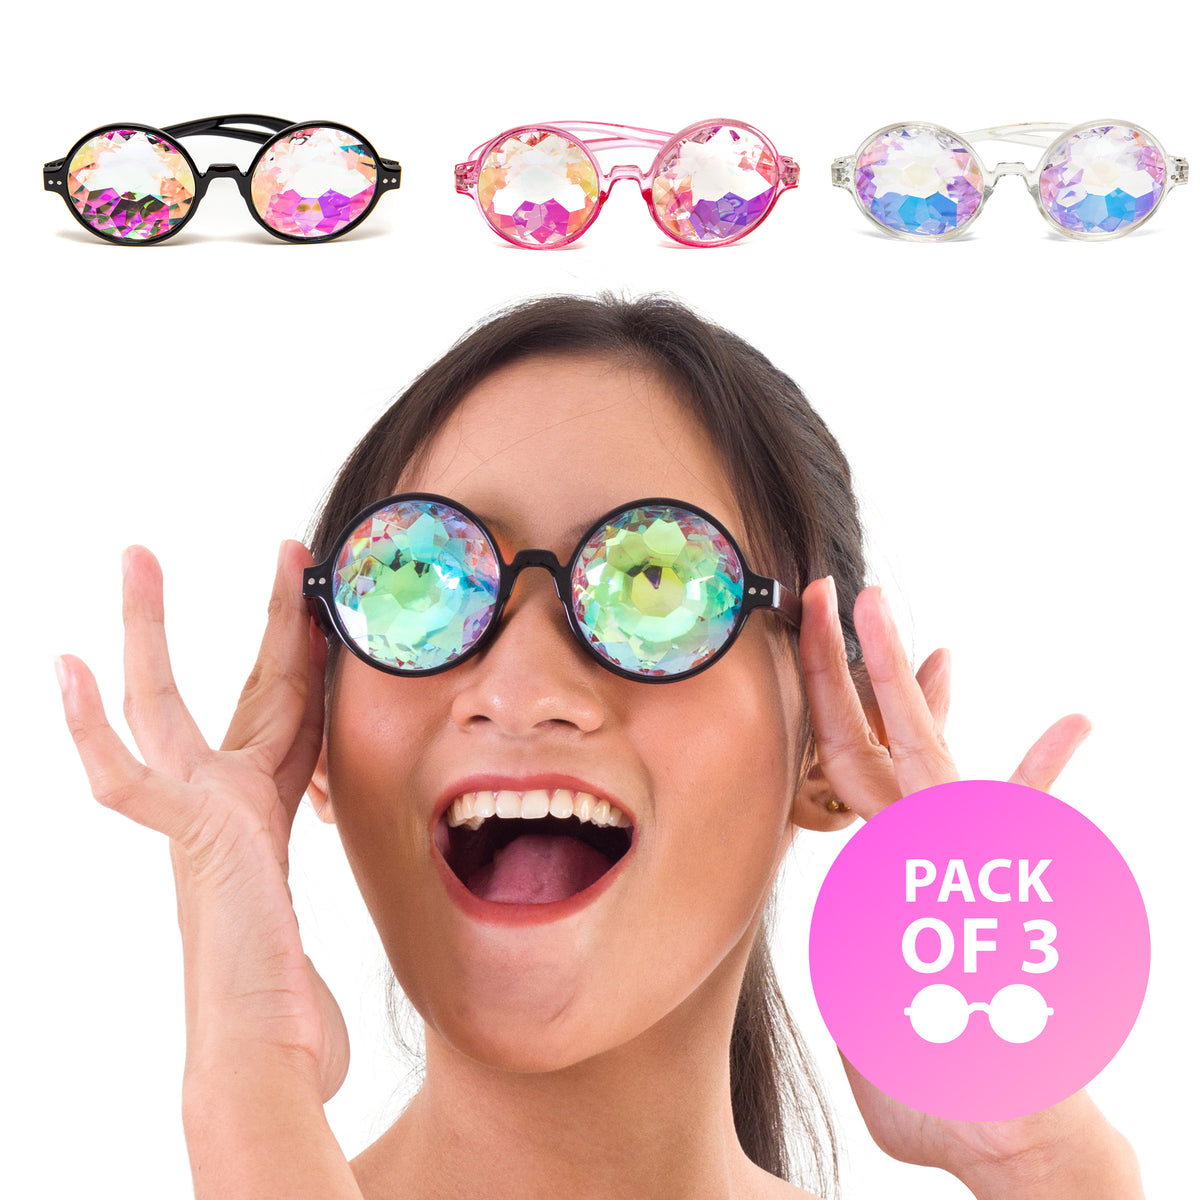 Fanny Pack Kaleidoscope Glasses - 3 Pk - Trippy Psychedelic Rave Goggles - Funky Prism Glasses For Raves - SoJourner Bags